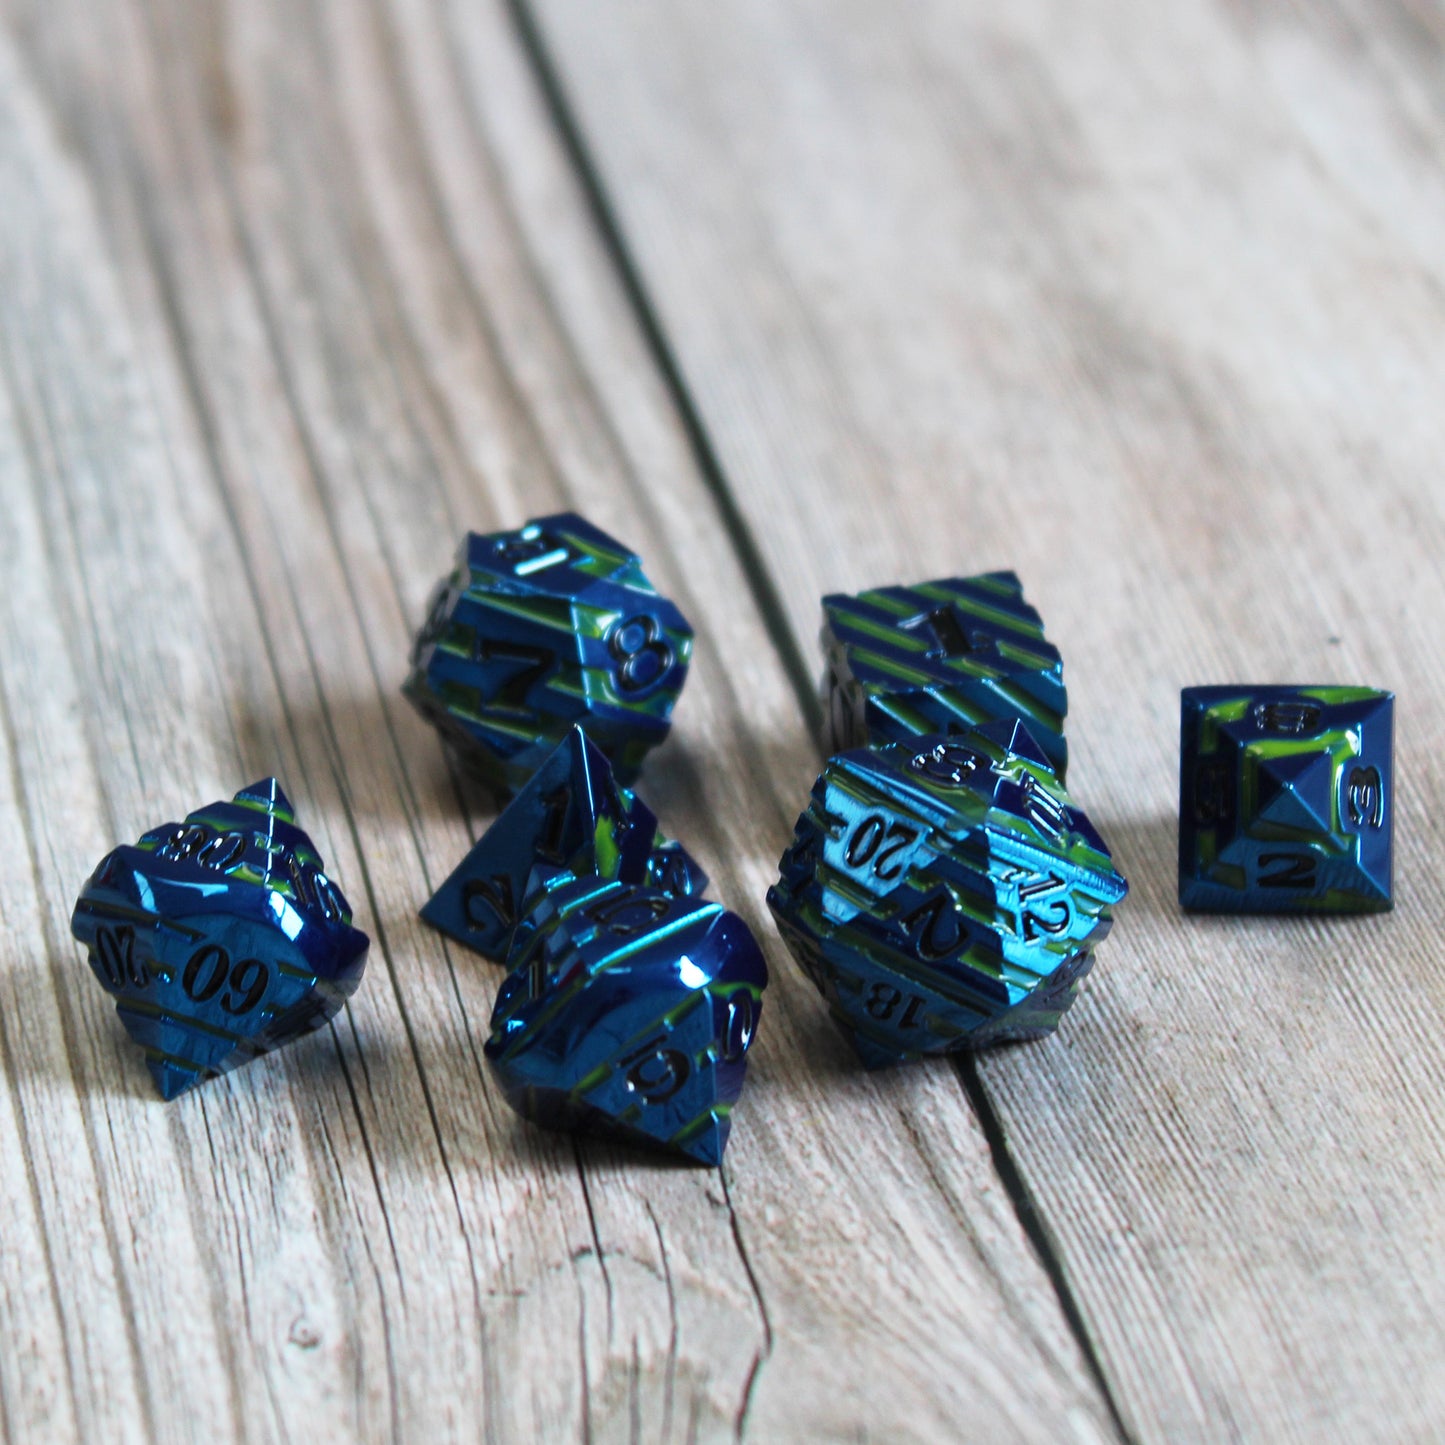 Dungeons and Dragons dice set on table